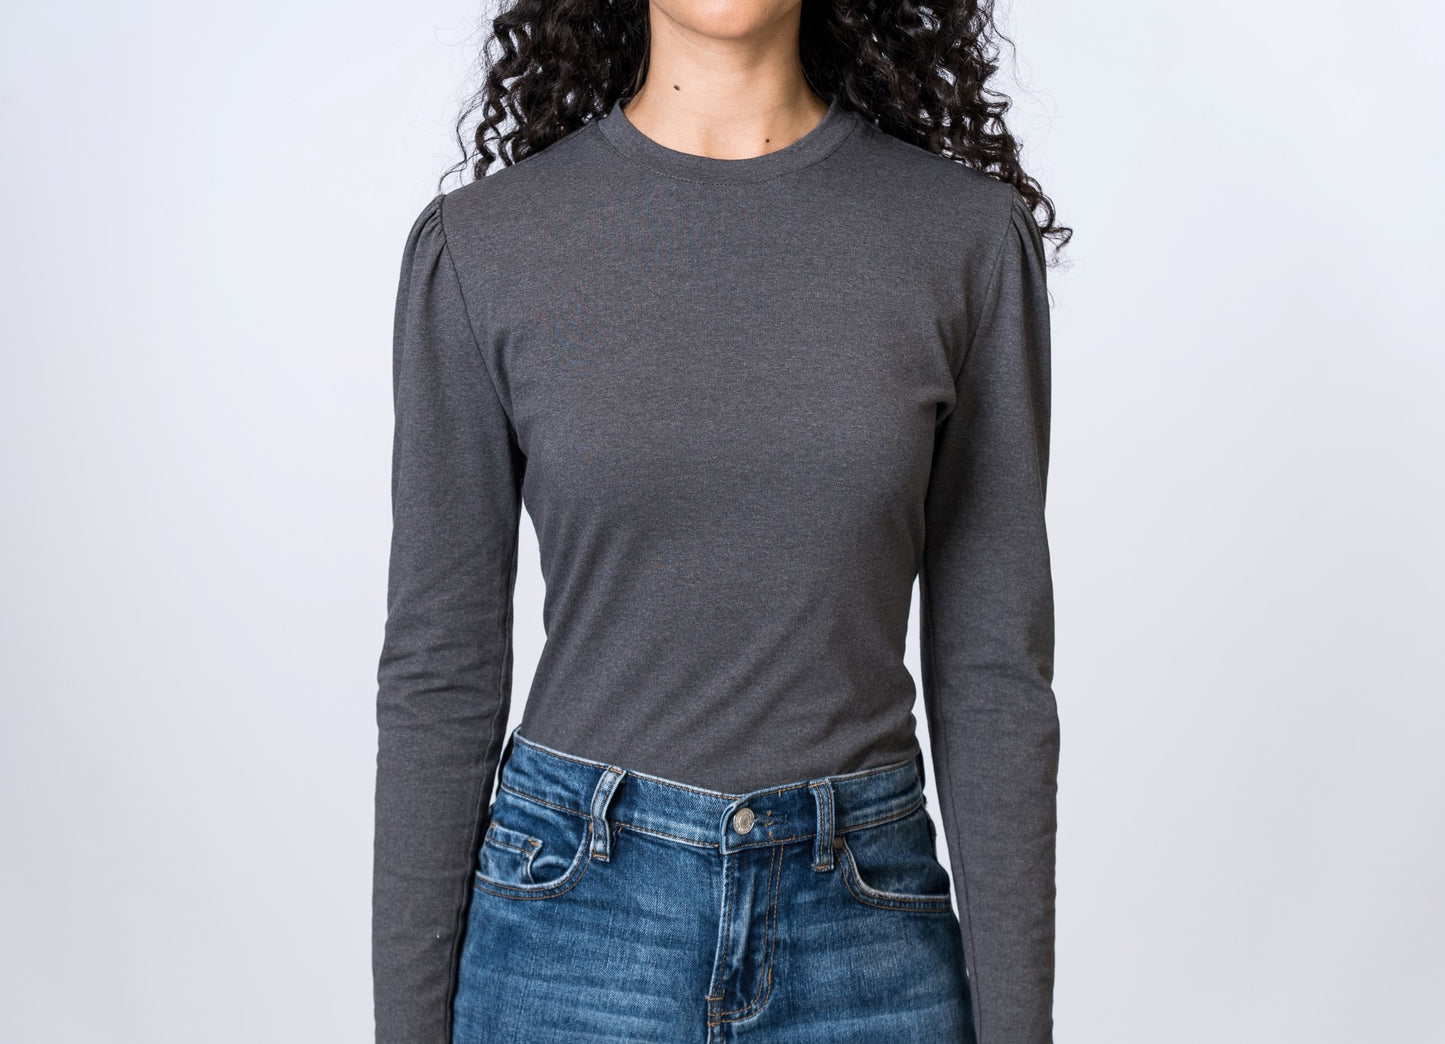 Load image into Gallery viewer, Woman wearing a gray, long sleeve top with puff sleeves and medium wash jeans. Front of clothing is being shown
